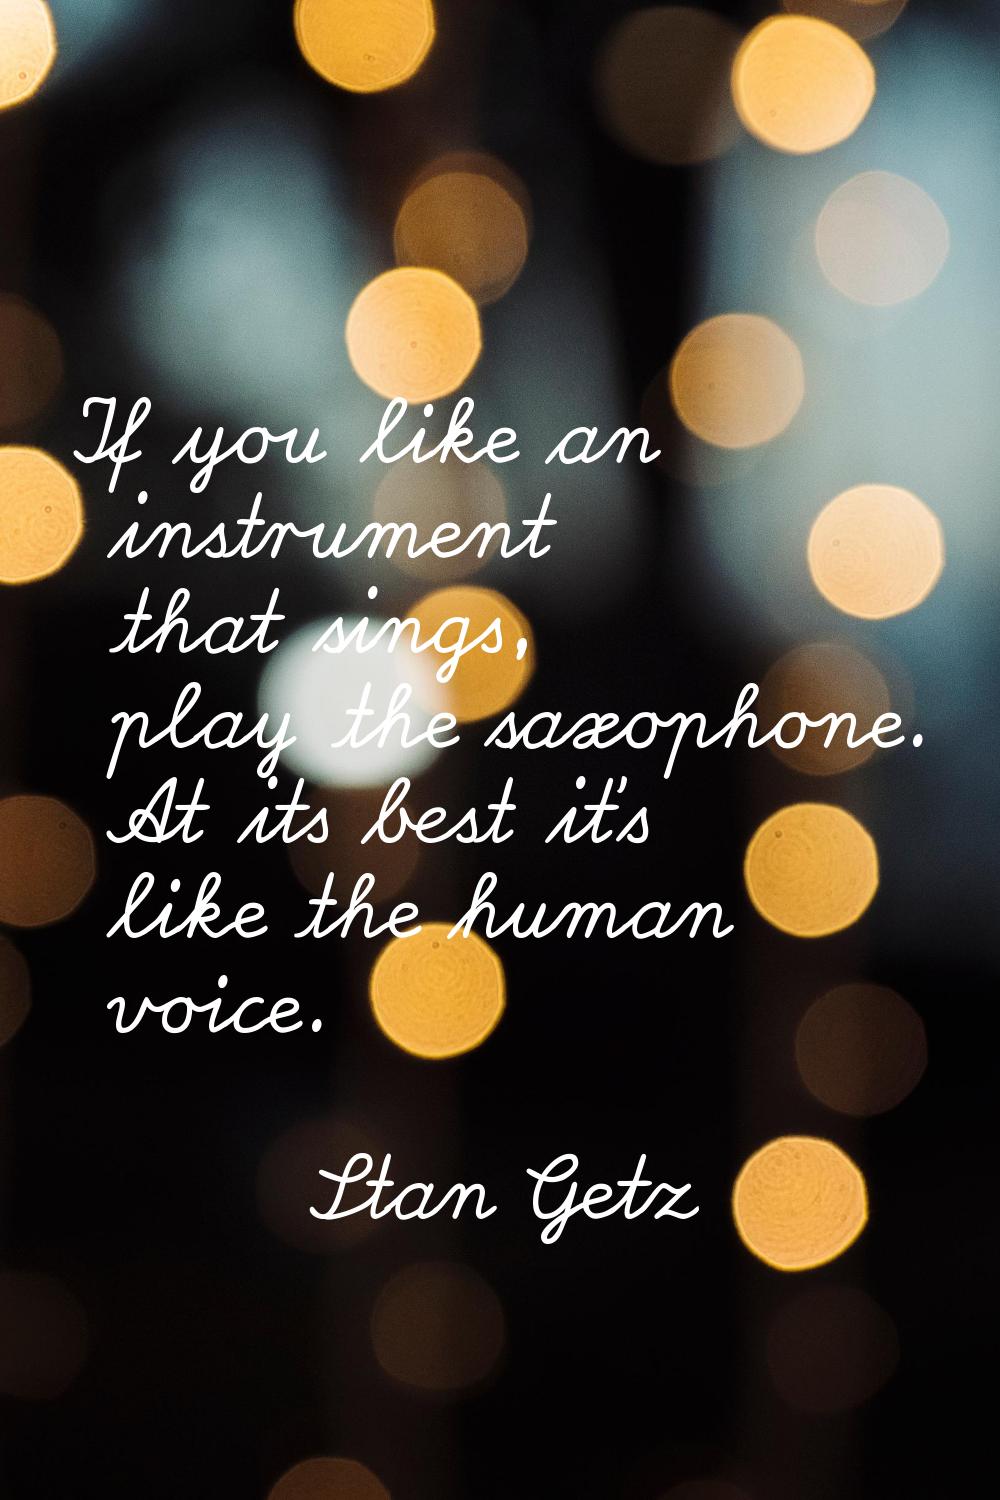 If you like an instrument that sings, play the saxophone. At its best it's like the human voice.